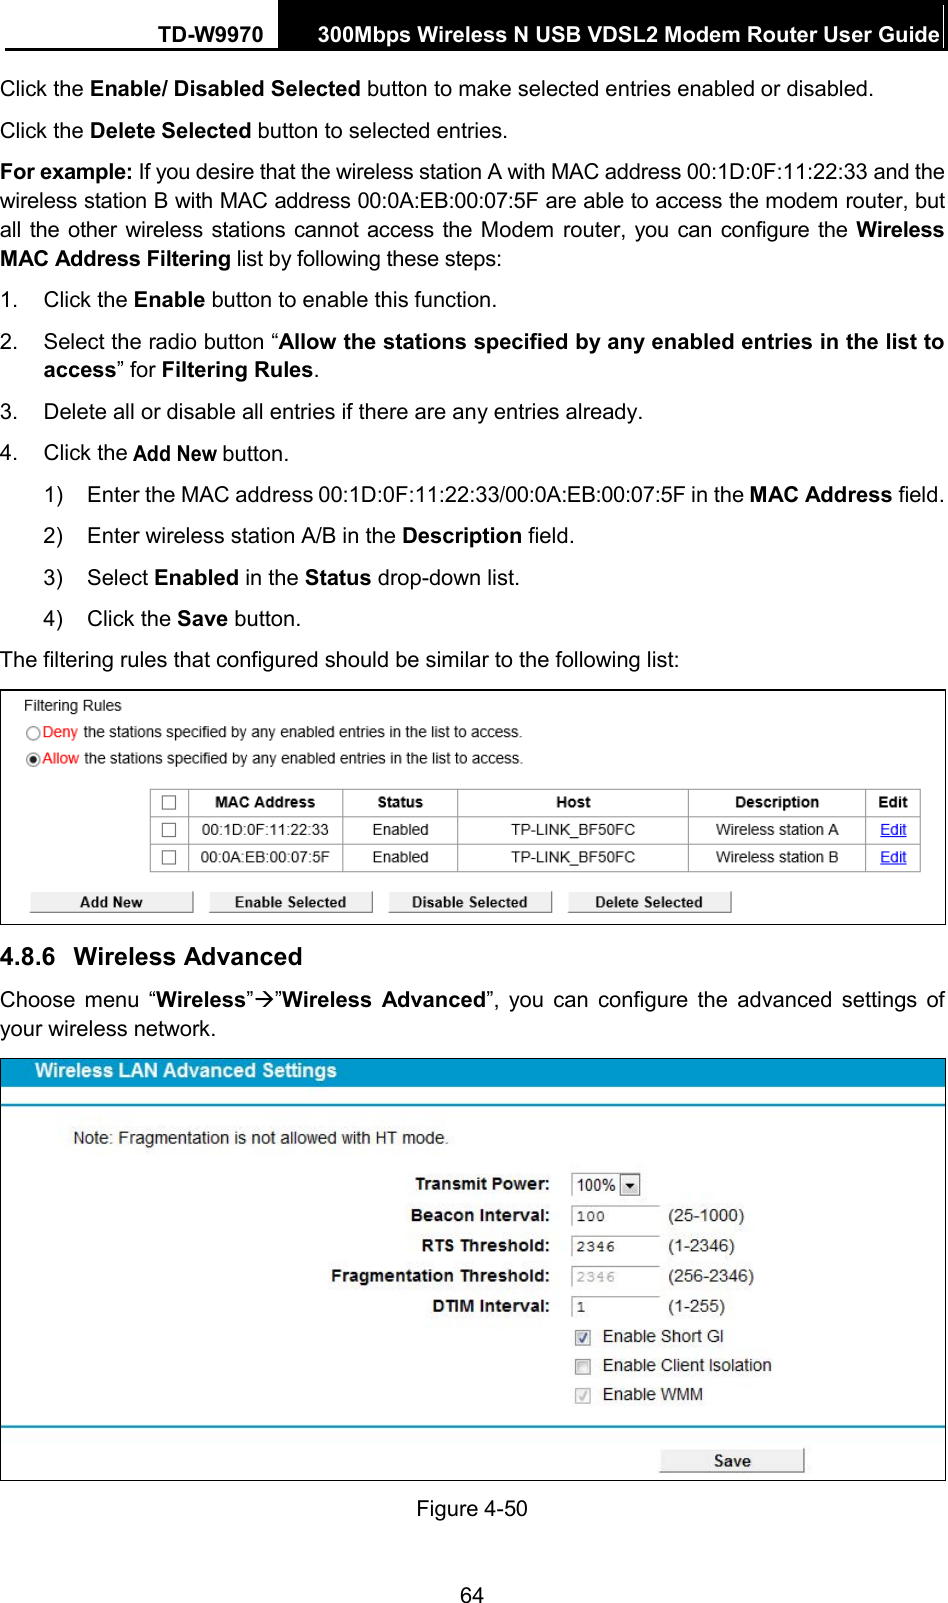 TD-W9970 300Mbps Wireless N USB VDSL2 Modem Router User Guide  Click the Enable/ Disabled Selected button to make selected entries enabled or disabled. Click the Delete Selected button to selected entries. For example: If you desire that the wireless station A with MAC address 00:1D:0F:11:22:33 and the wireless station B with MAC address 00:0A:EB:00:07:5F are able to access the modem router, but all the  other wireless stations cannot access the Modem router, you can configure the Wireless MAC Address Filtering list by following these steps: 1. Click the Enable button to enable this function. 2. Select the radio button “Allow the stations specified by any enabled entries in the list to access” for Filtering Rules. 3. Delete all or disable all entries if there are any entries already. 4. Click the Add New button.   1)  Enter the MAC address 00:1D:0F:11:22:33/00:0A:EB:00:07:5F in the MAC Address field. 2)  Enter wireless station A/B in the Description field. 3)  Select Enabled in the Status drop-down list. 4)  Click the Save button. The filtering rules that configured should be similar to the following list:  4.8.6 Wireless Advanced Choose menu “Wireless””Wireless  Advanced”, you can  configure the advanced settings  of your wireless network.  Figure 4-50 64 